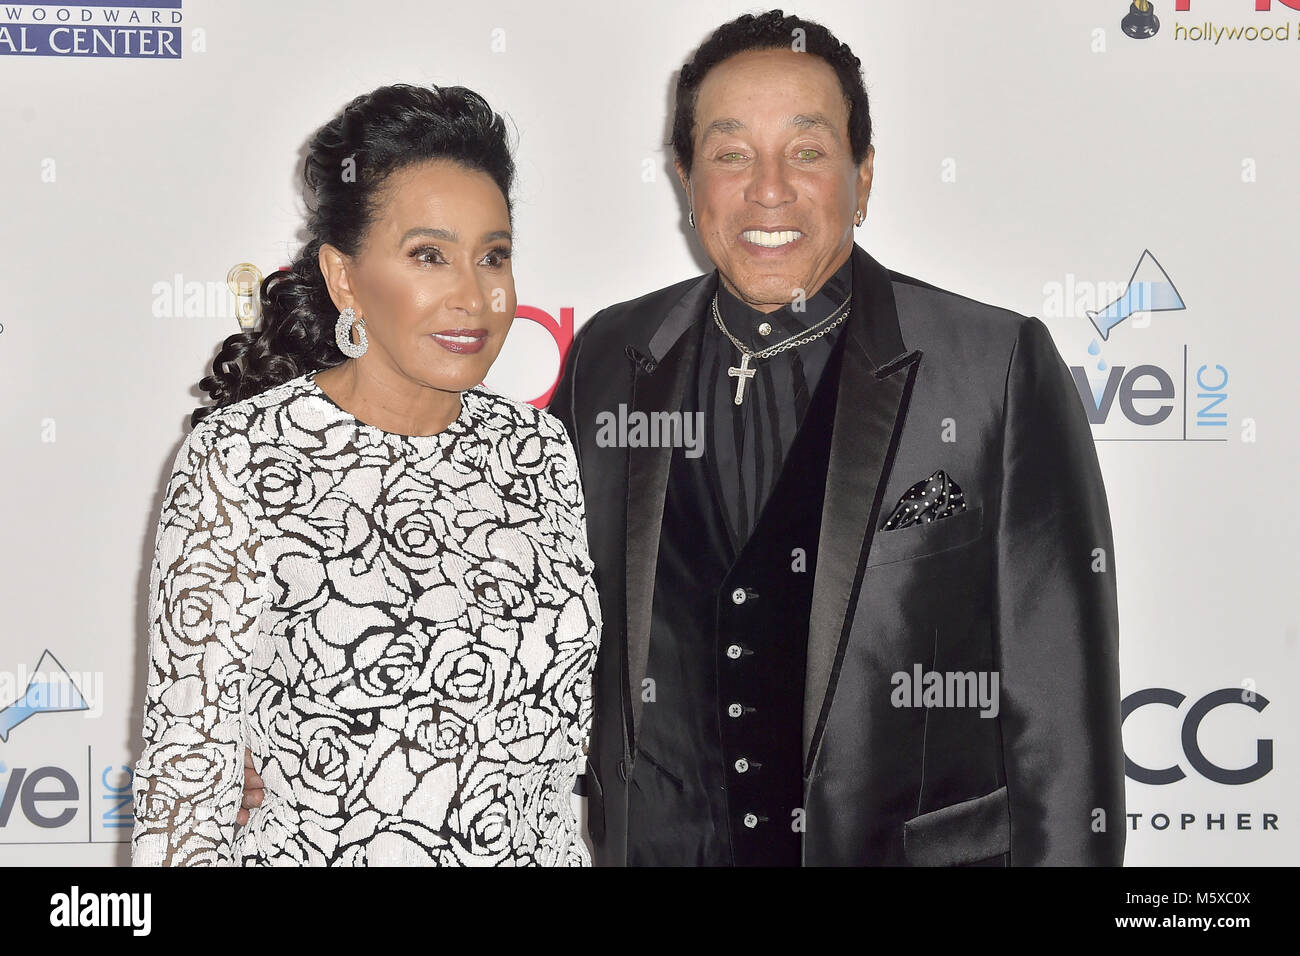 Los Angeles, California. 25th Feb, 2018. Smokey Robinson and his wife Frances Glandney attend the 4th Hollywood Beauty Awards at Avalon Hollywood on February 25, 2018 in Los Angeles, California. | Verwendung weltweit Credit: dpa/Alamy Live News Stock Photo